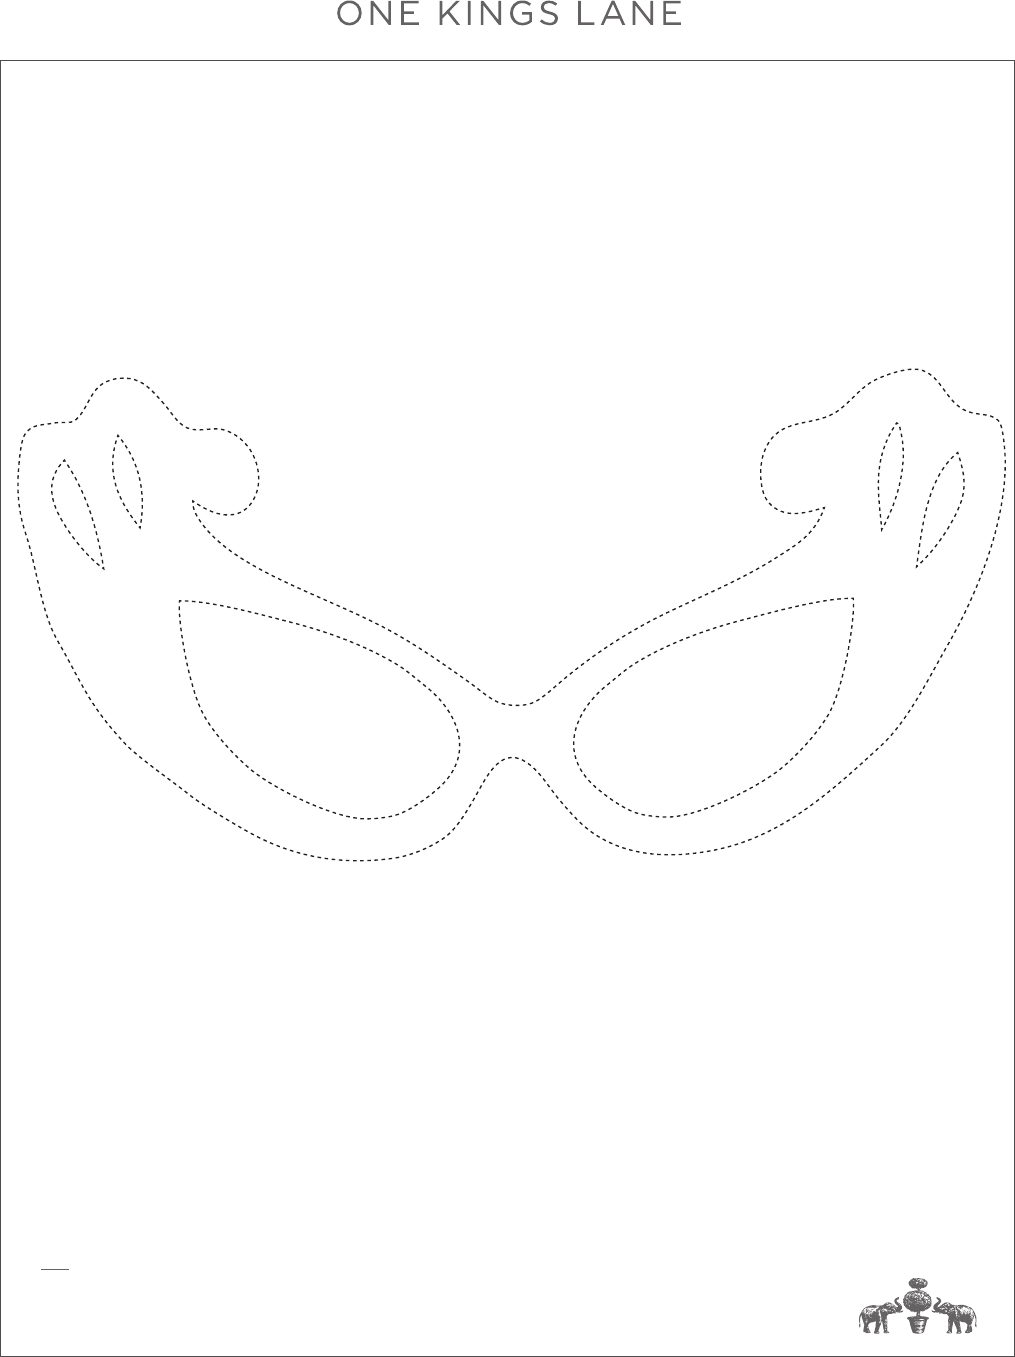 Party Mask Template